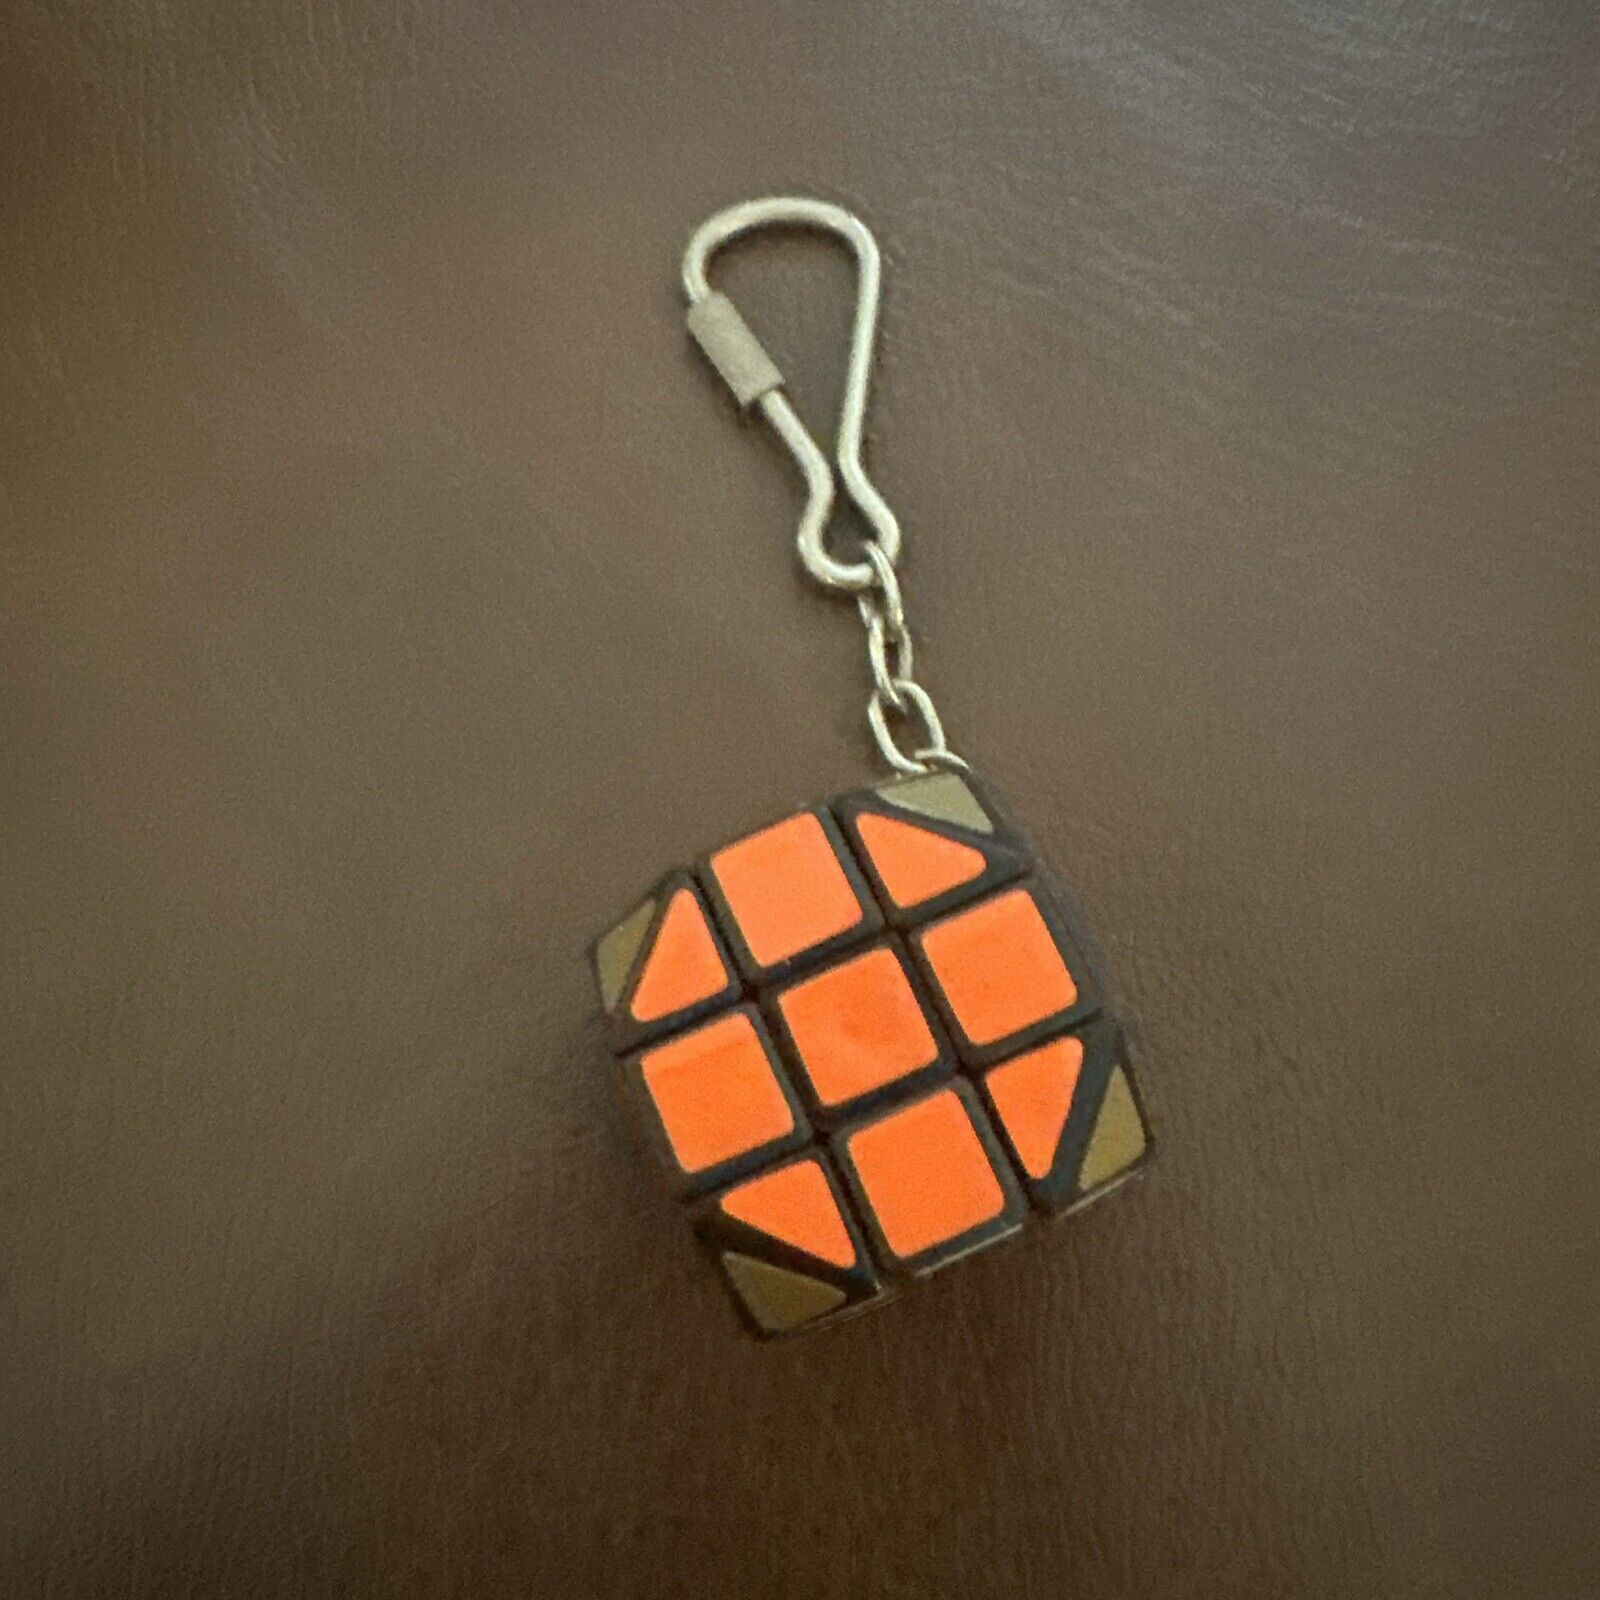 Rare vintage Rubik’s cube keychain OG None Like This  Original  collectible